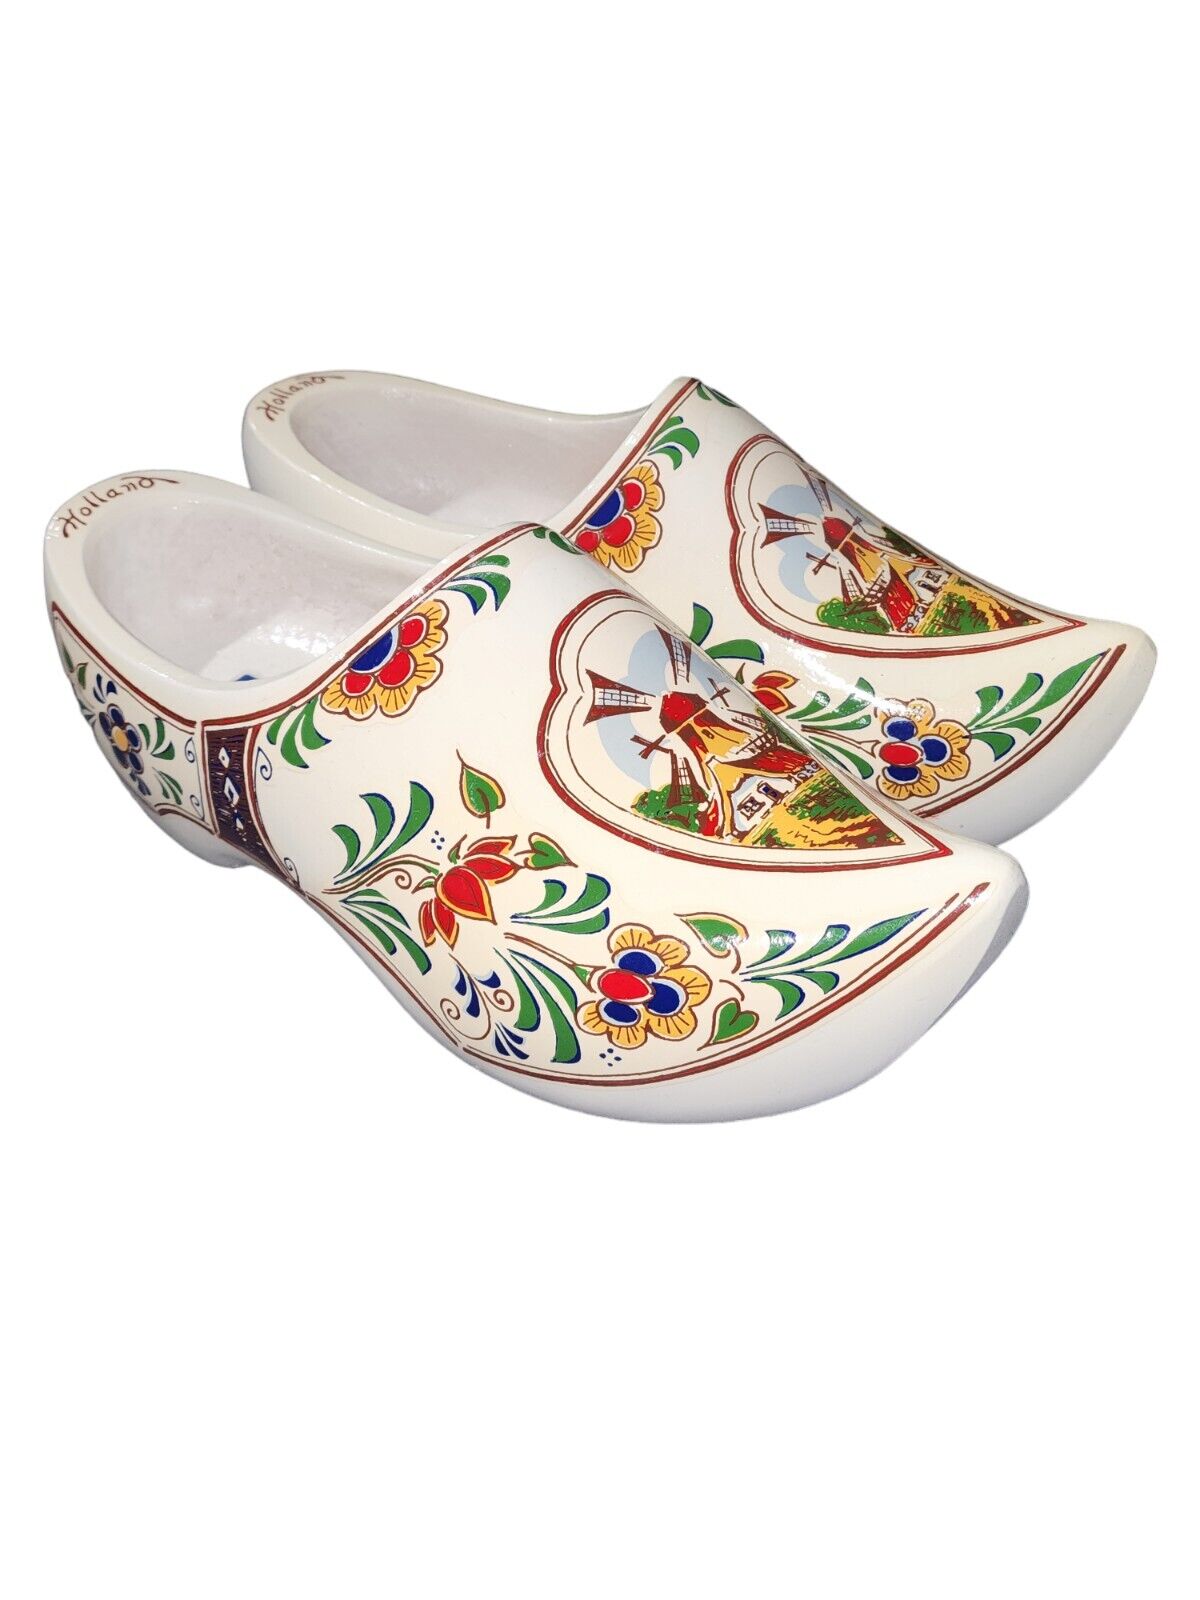 38/39 Handpainted Wooden Shoes Windmills and Flowers  HOLLAND Size 8